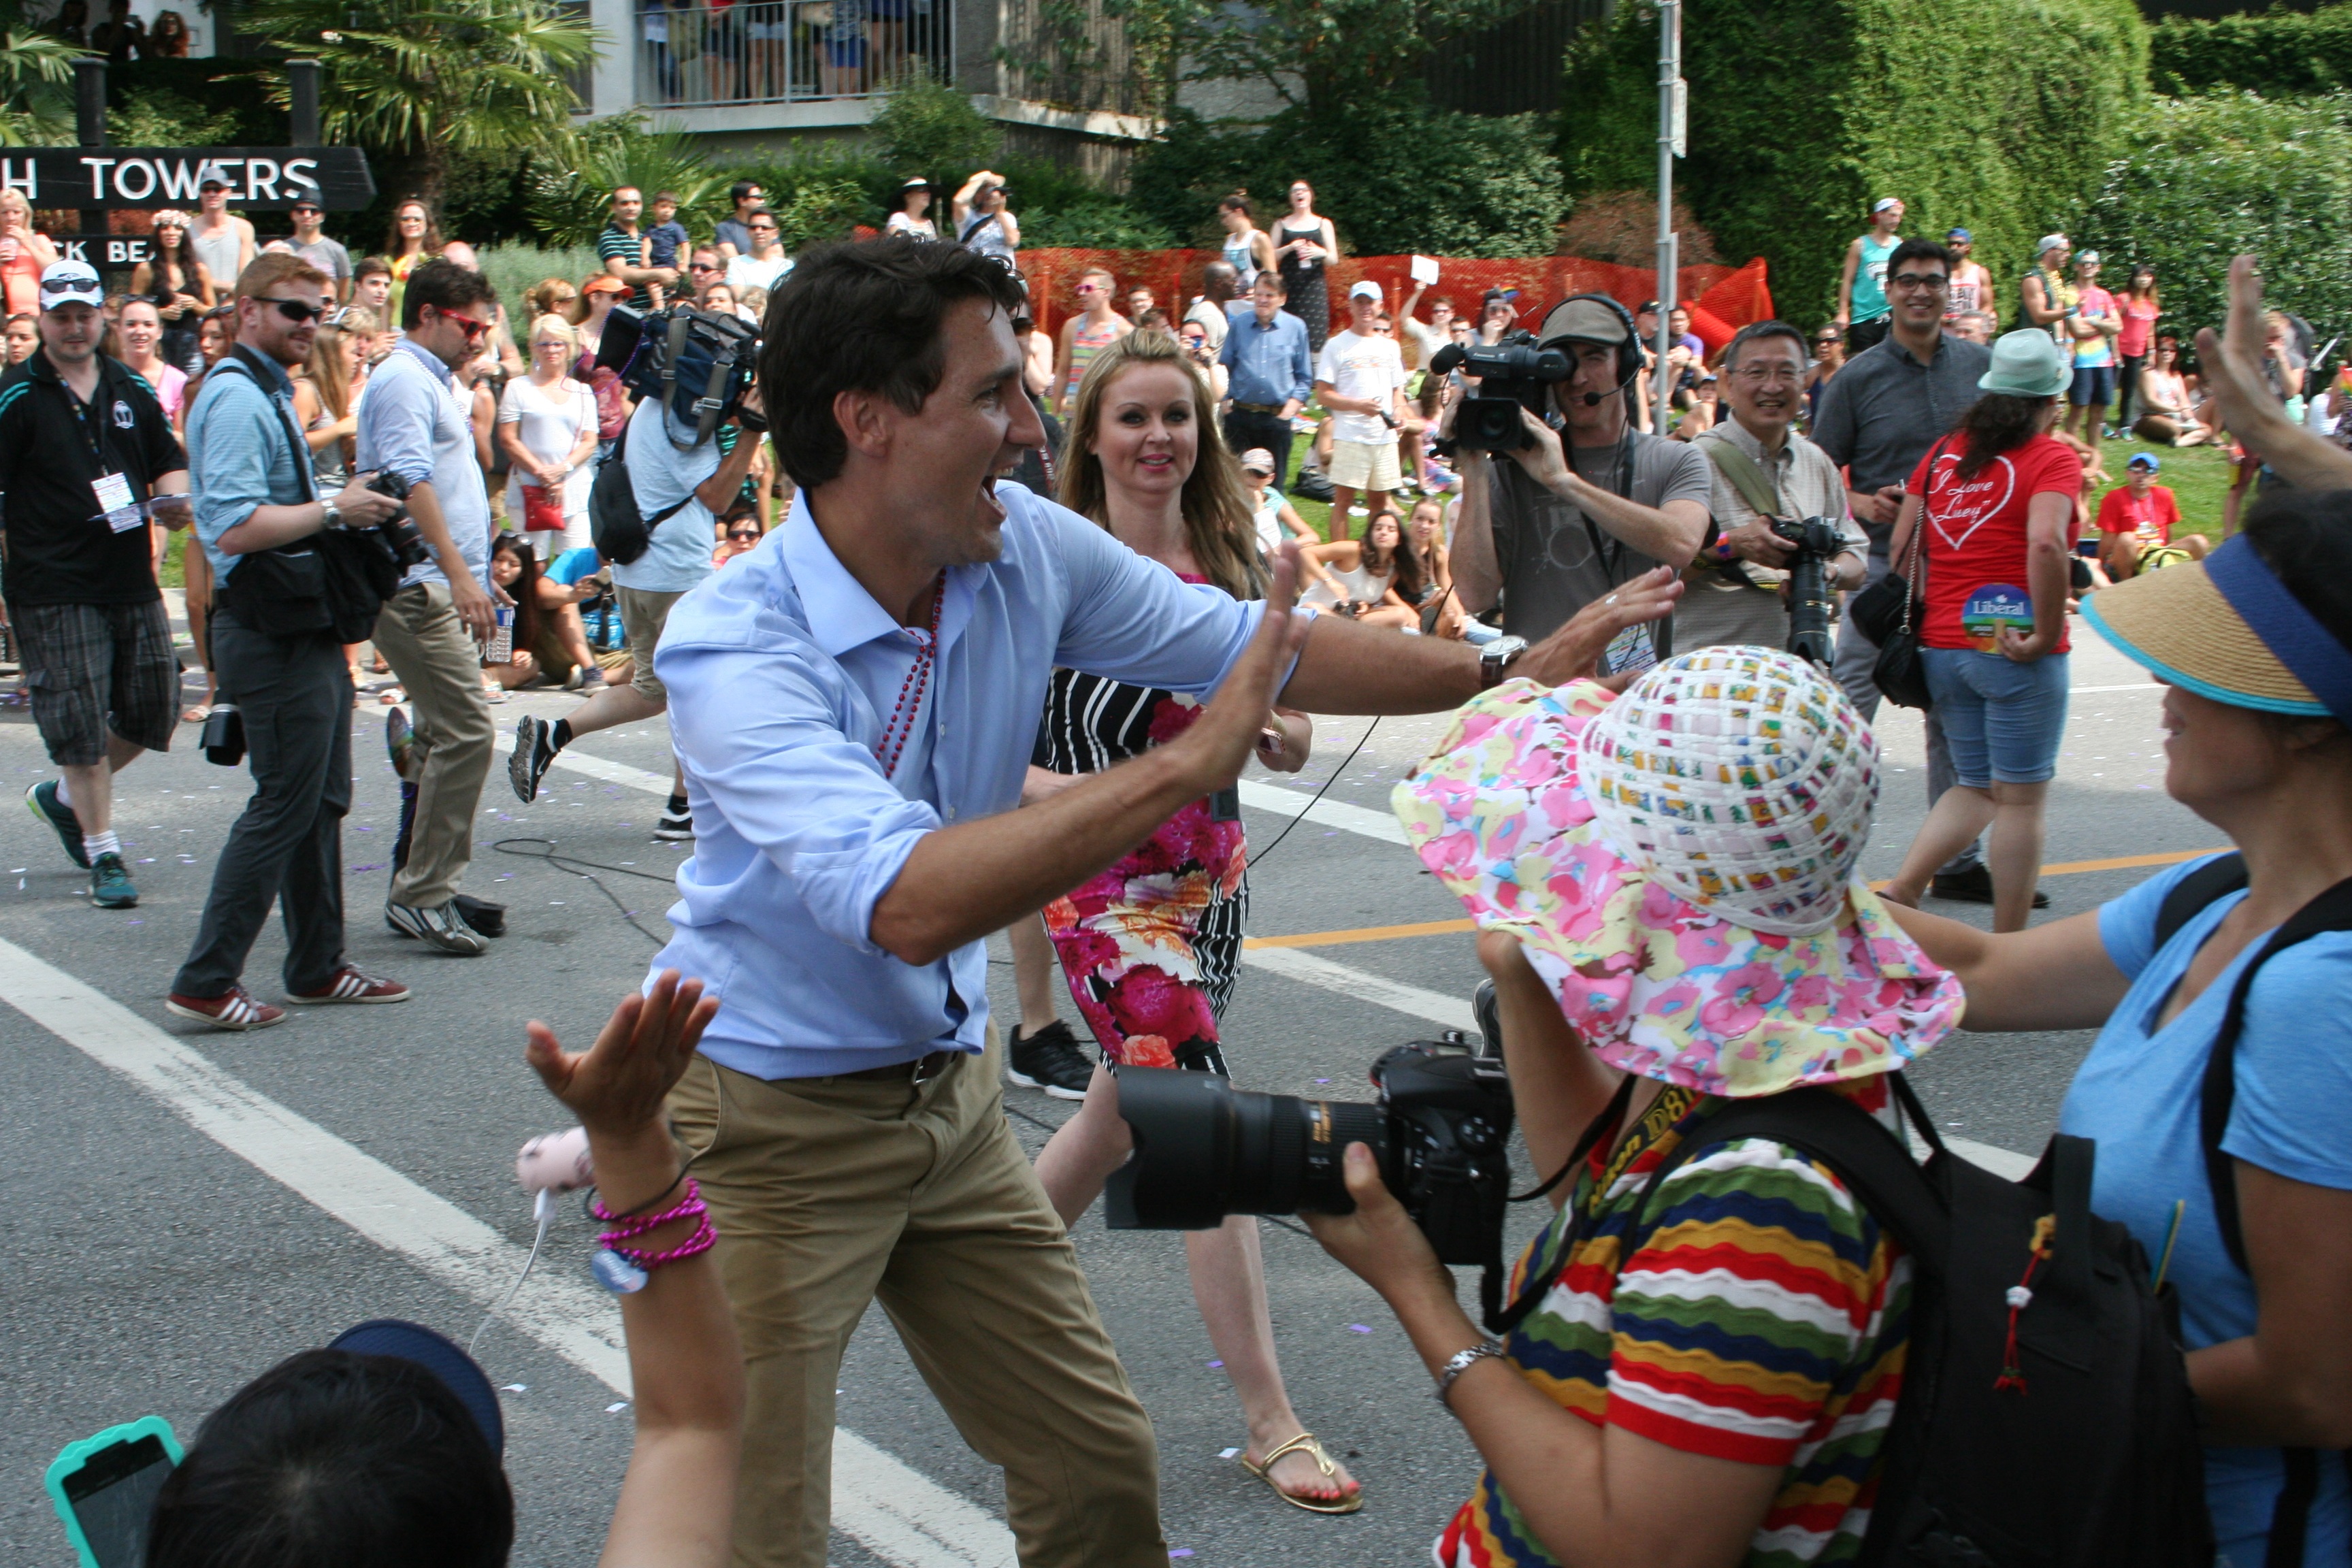 Justin Trudeau at Vancouver Pride in 2015. | <a href="https://commons.wikimedia.org/wiki/File:Justin_Trudeau_at_the_Vancouver_LGBTQ_Pride_2015.jpg#/media/File:Justin_Trudeau_at_the_Vancouver_LGBTQ_Pride_2015.jpg">Supplied by vl04 - Flickr [CC BY 2.0] via Wikimedia Commons.</a>